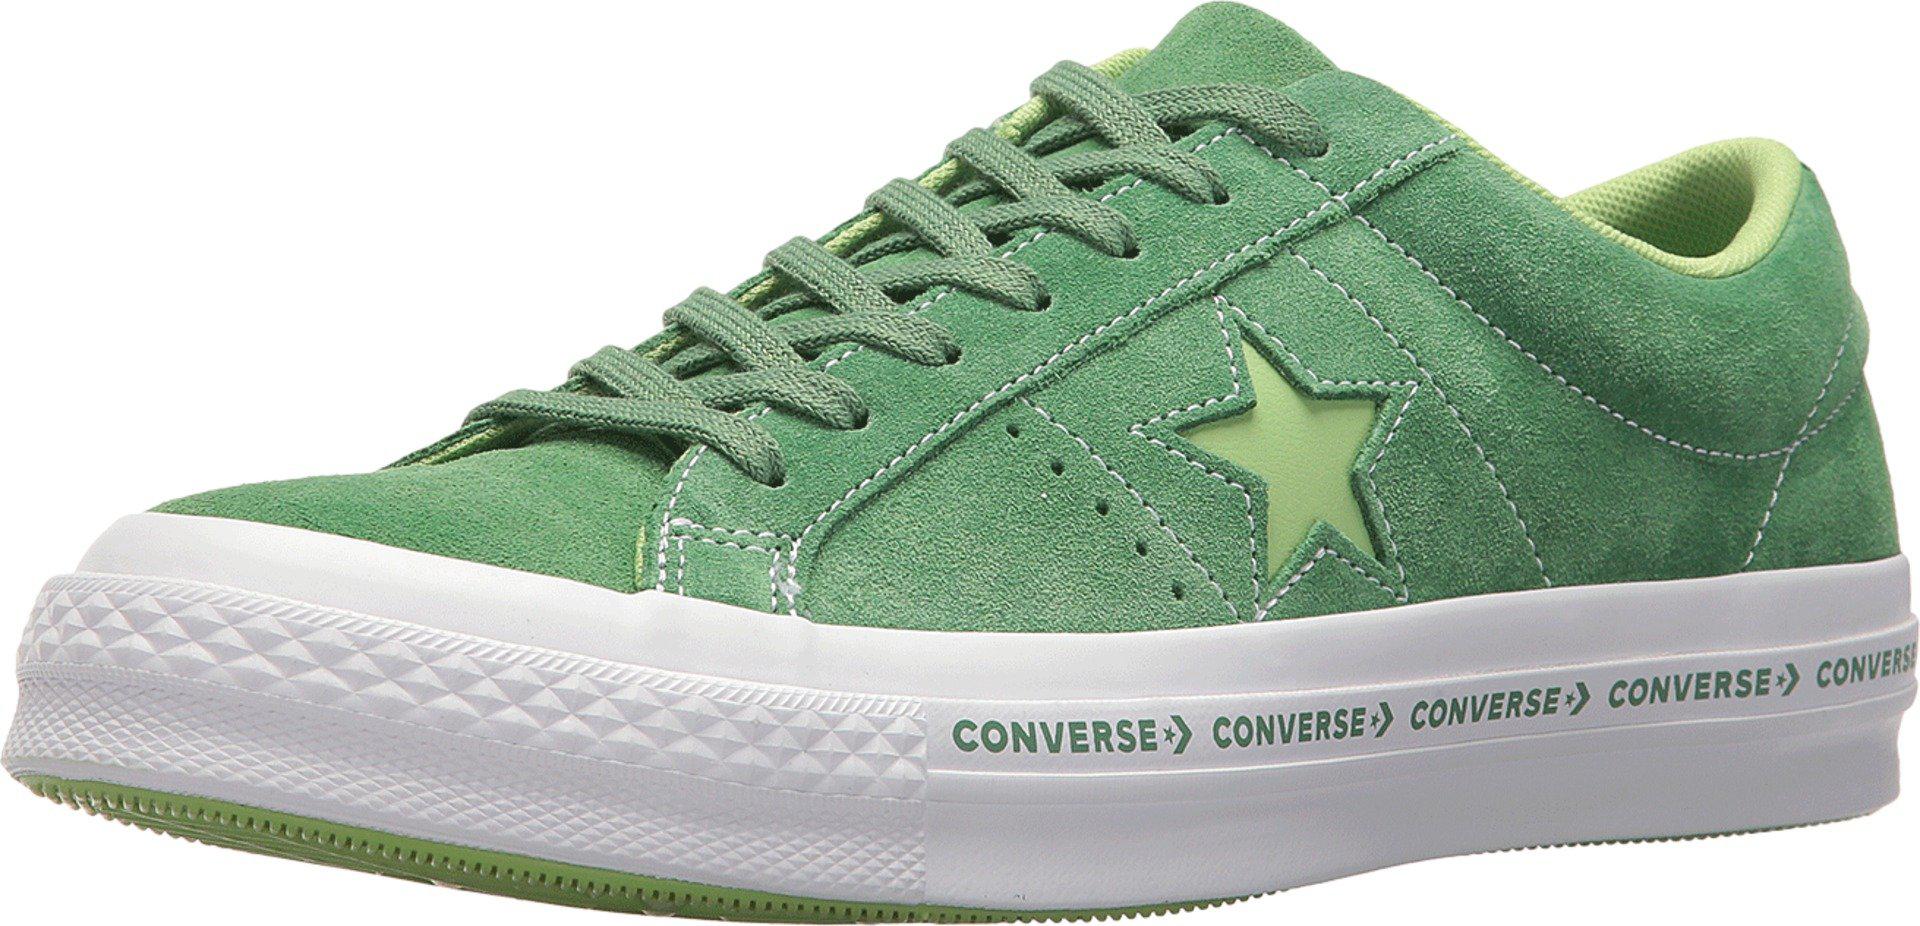 Converse One Star Ox in Green for |